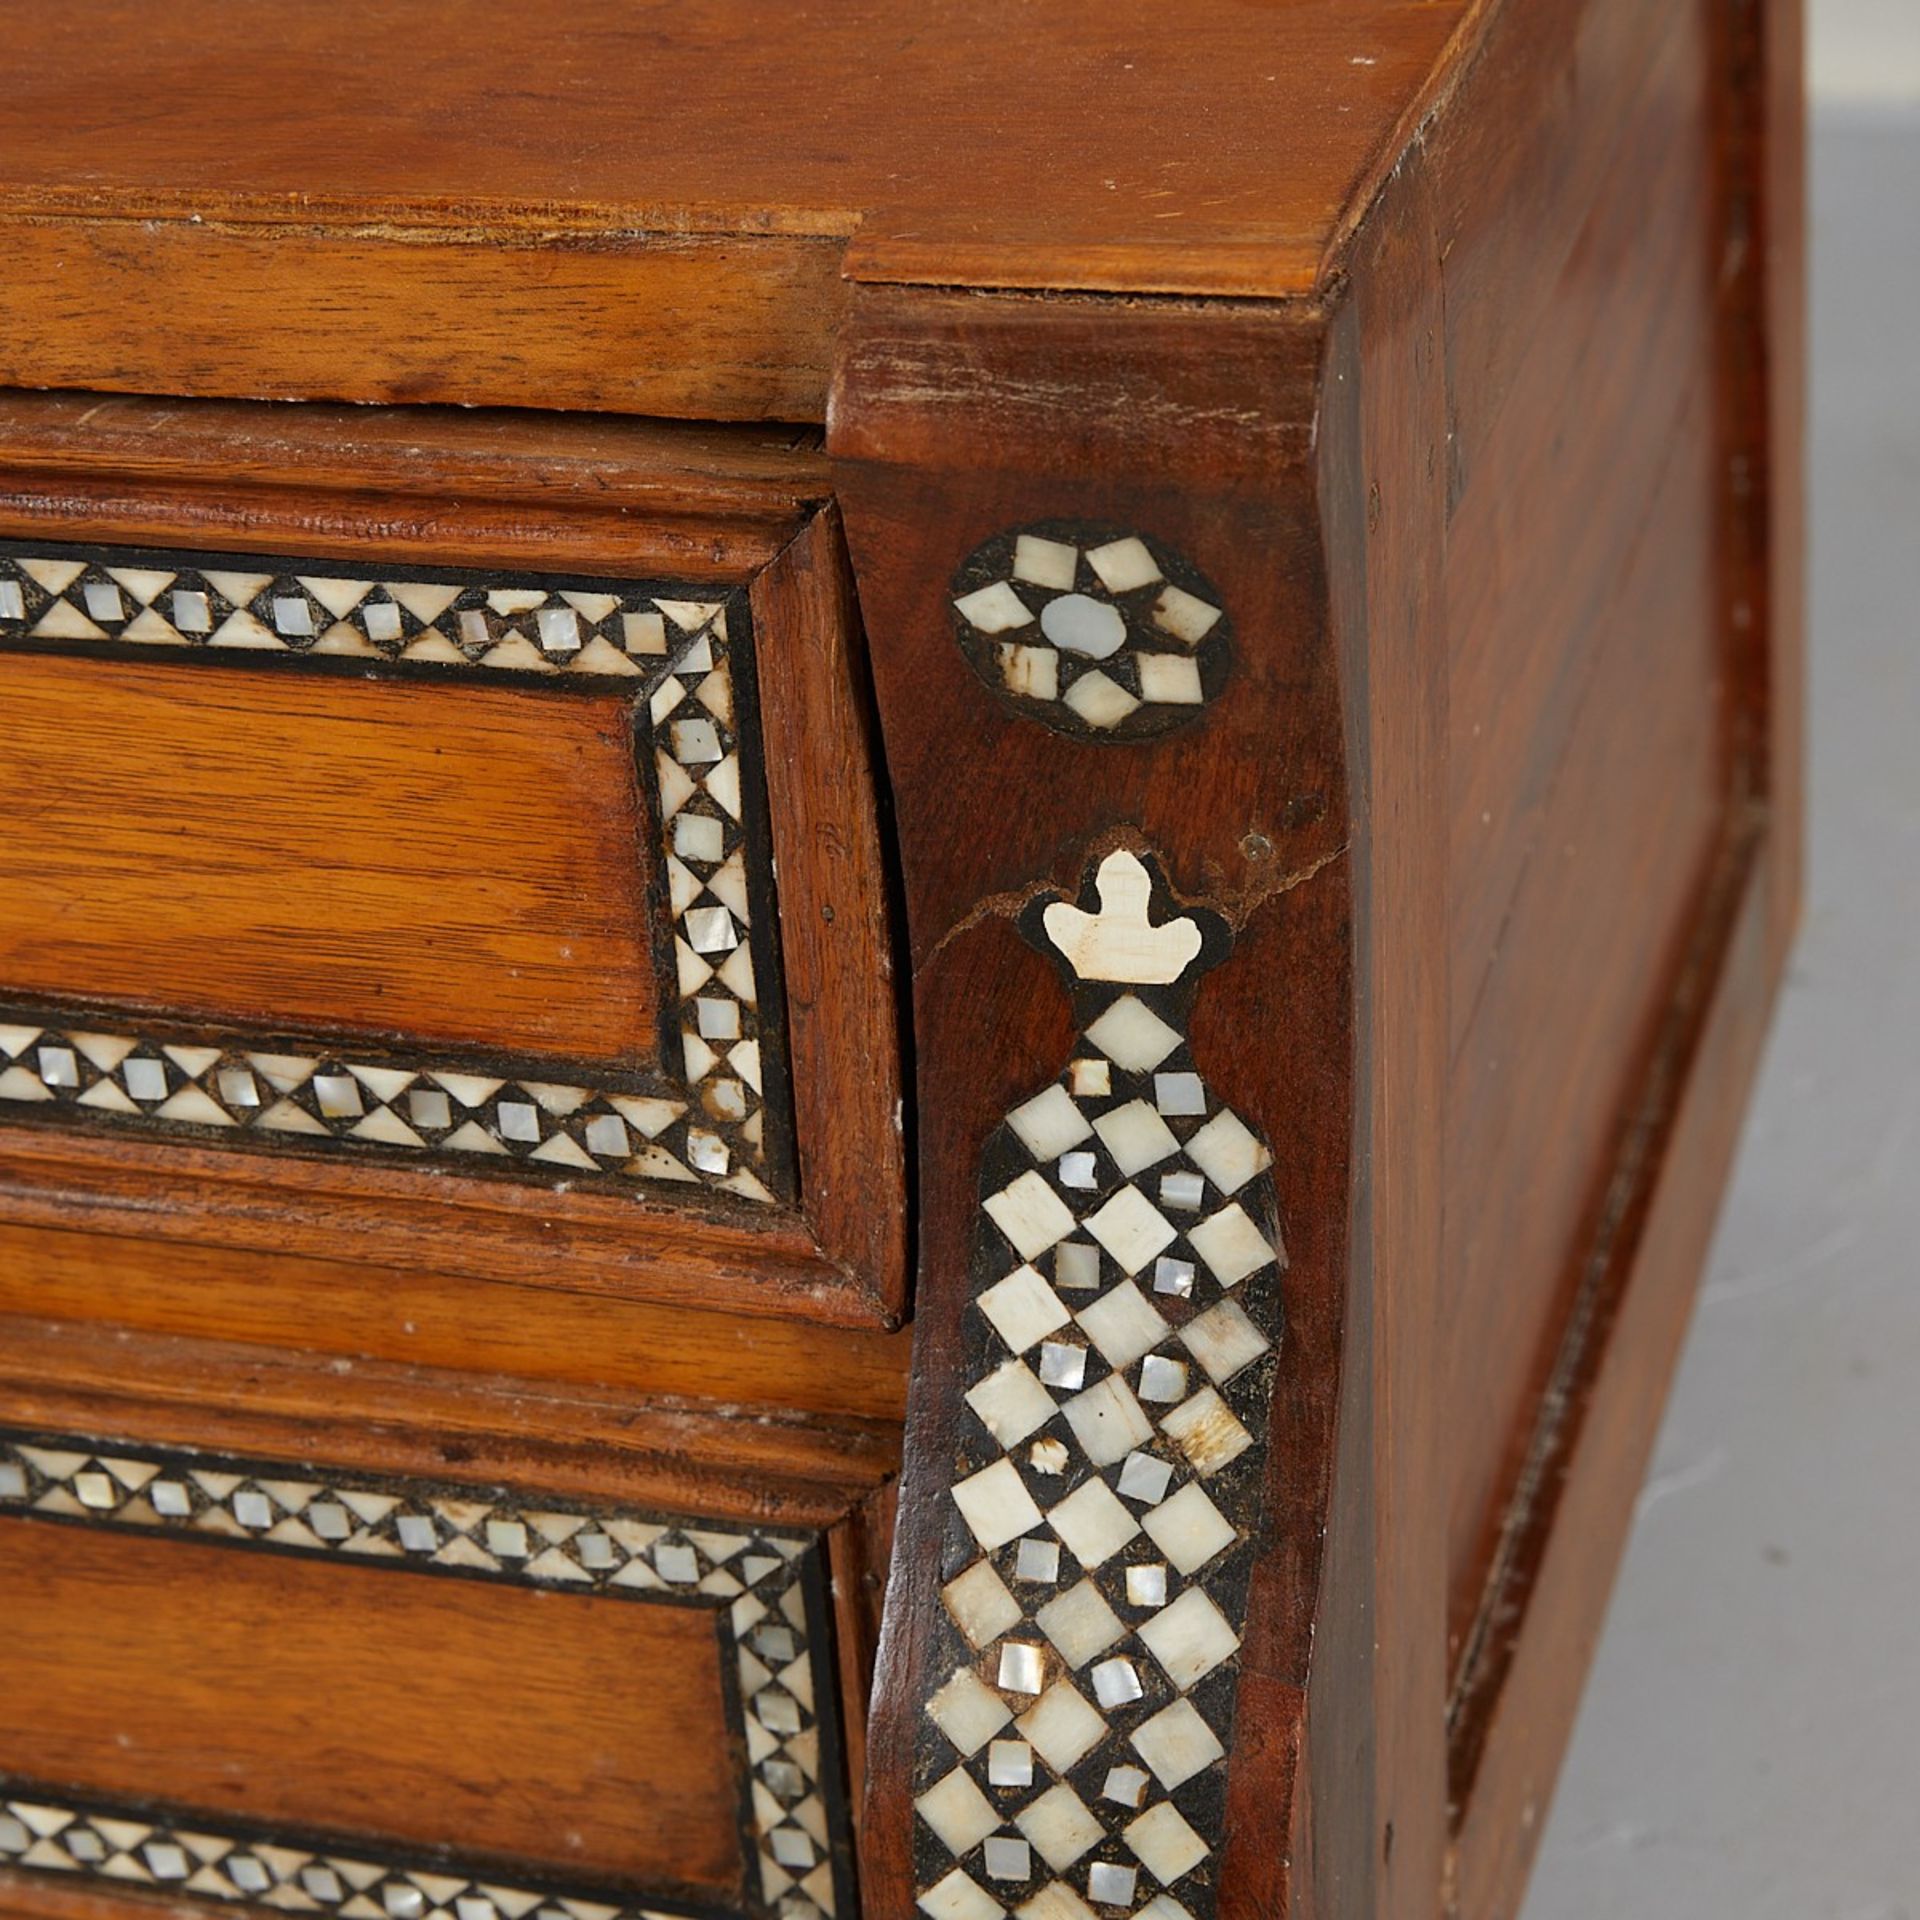 2 Syrian Mother of Pearl Inlaid Wood End Tables - Image 12 of 25